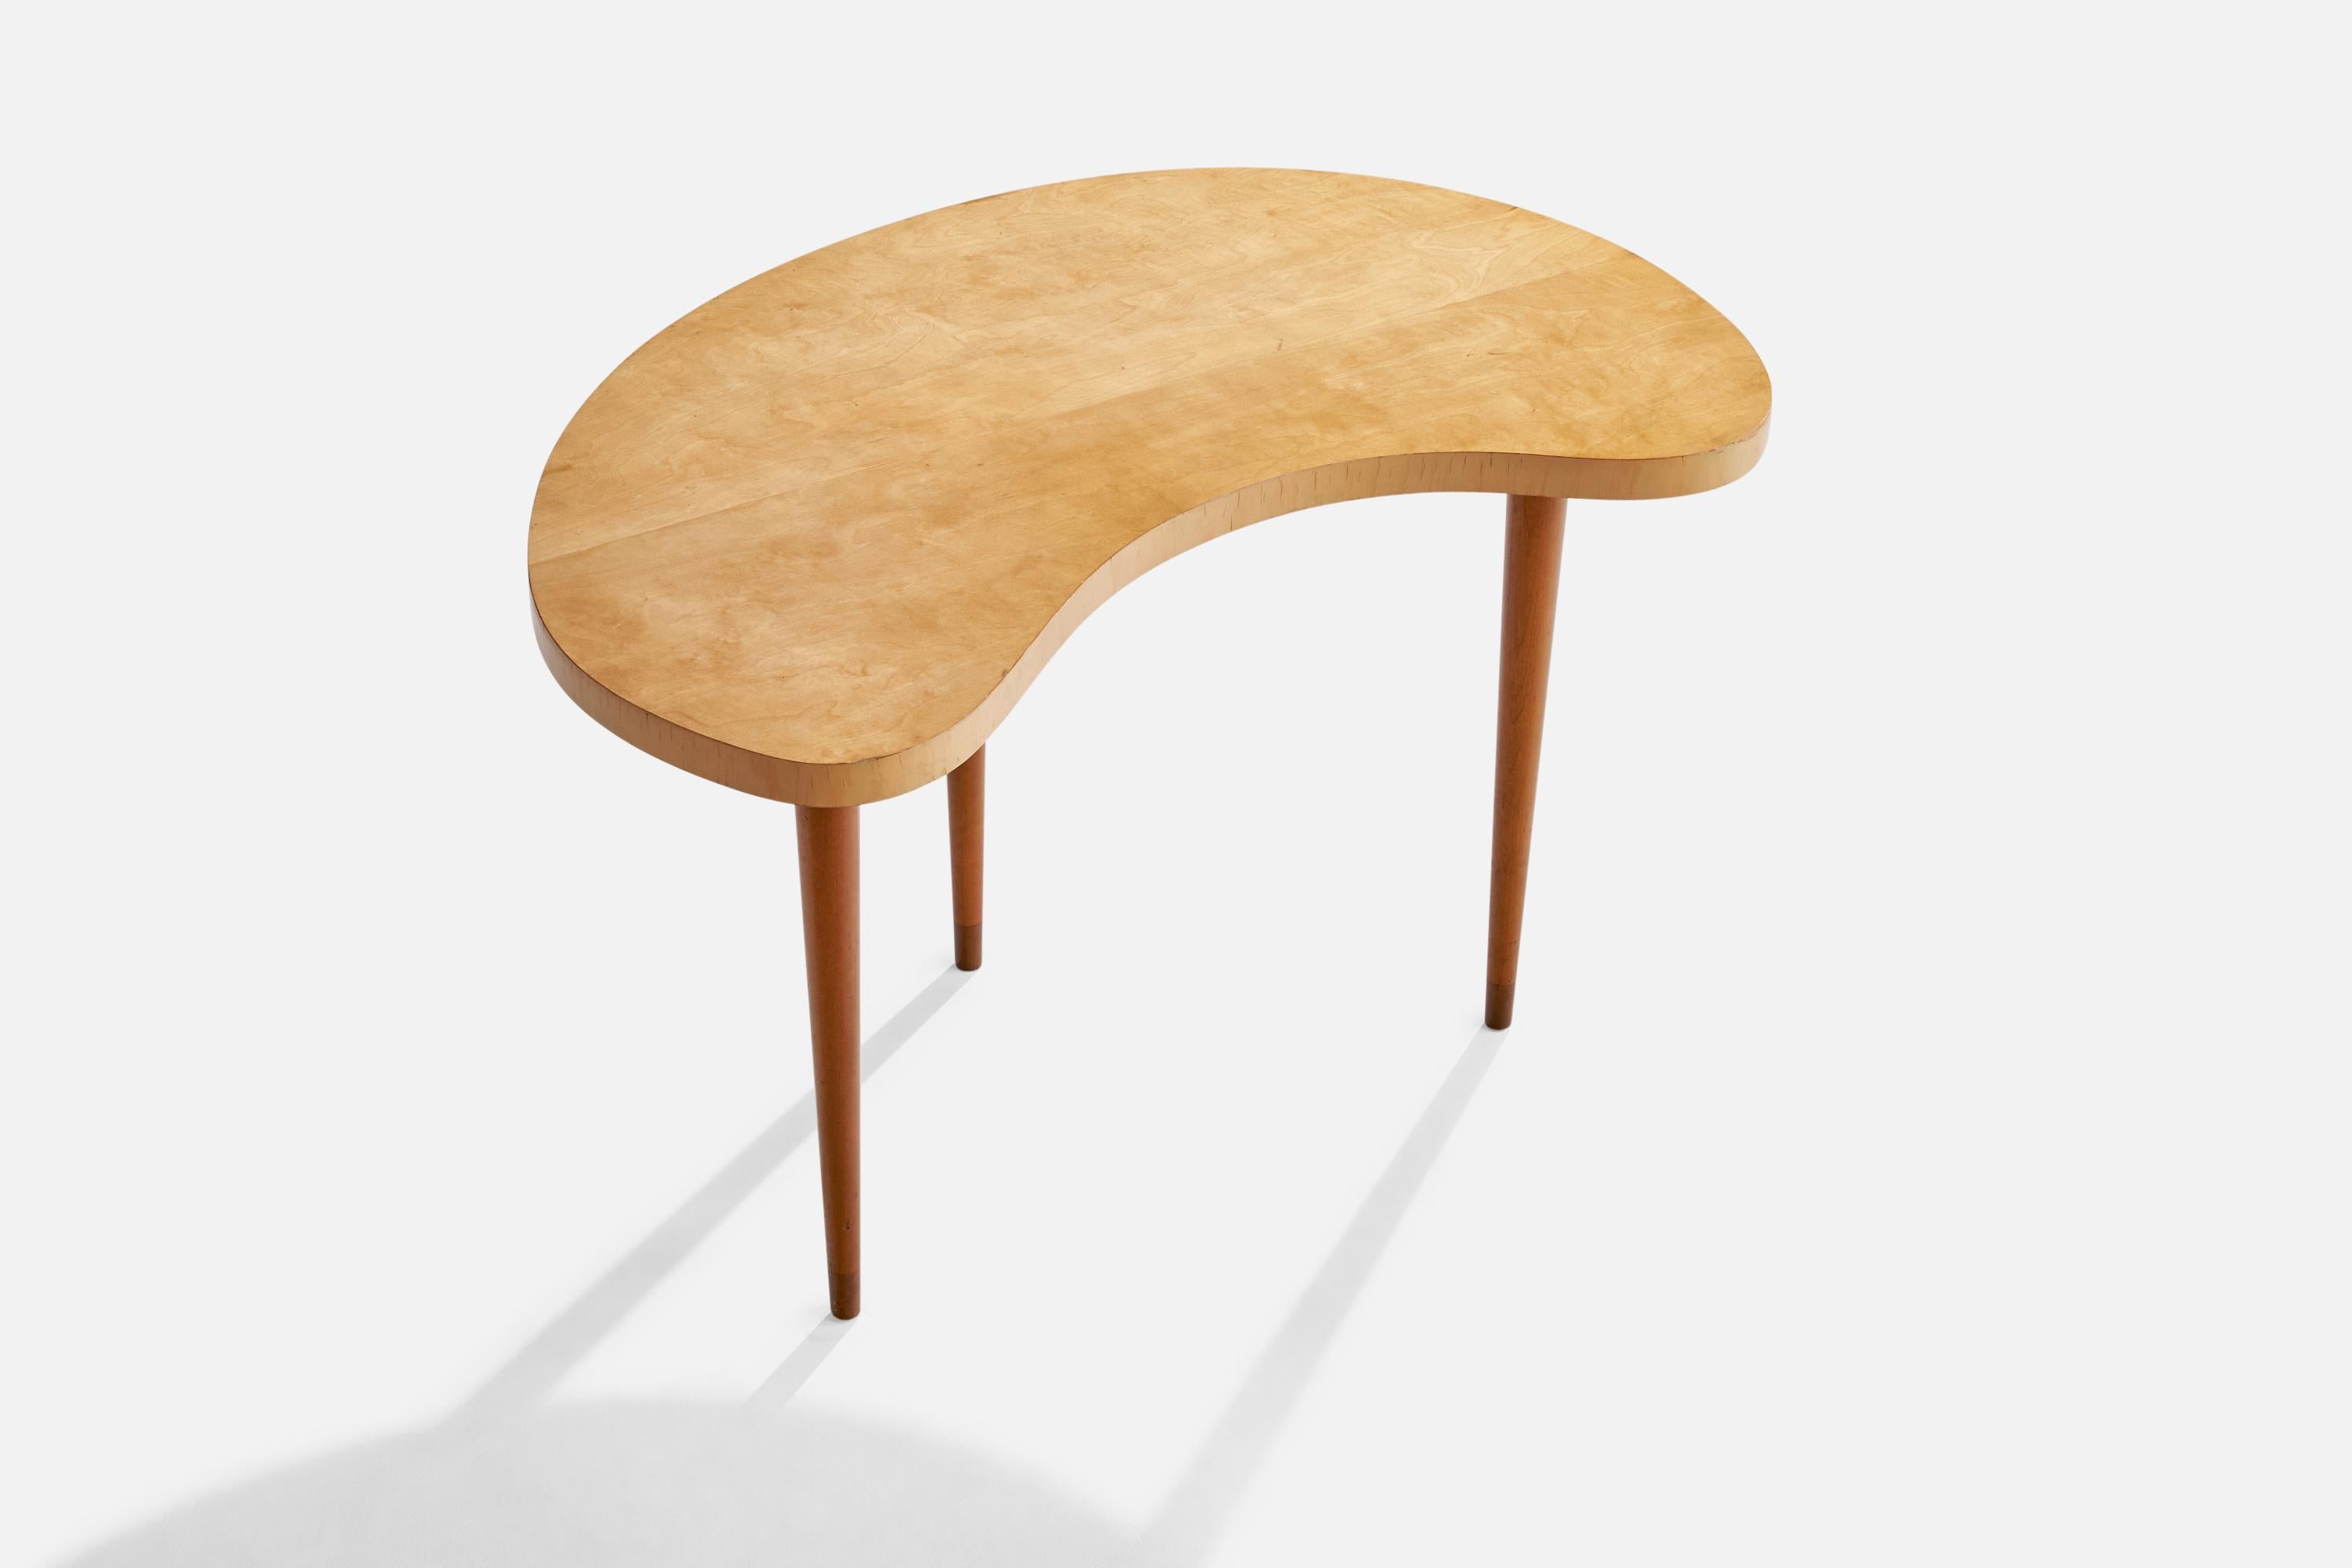 An organic birch table designed by American designed Edmond Spence and produced in Sweden, 1950s.